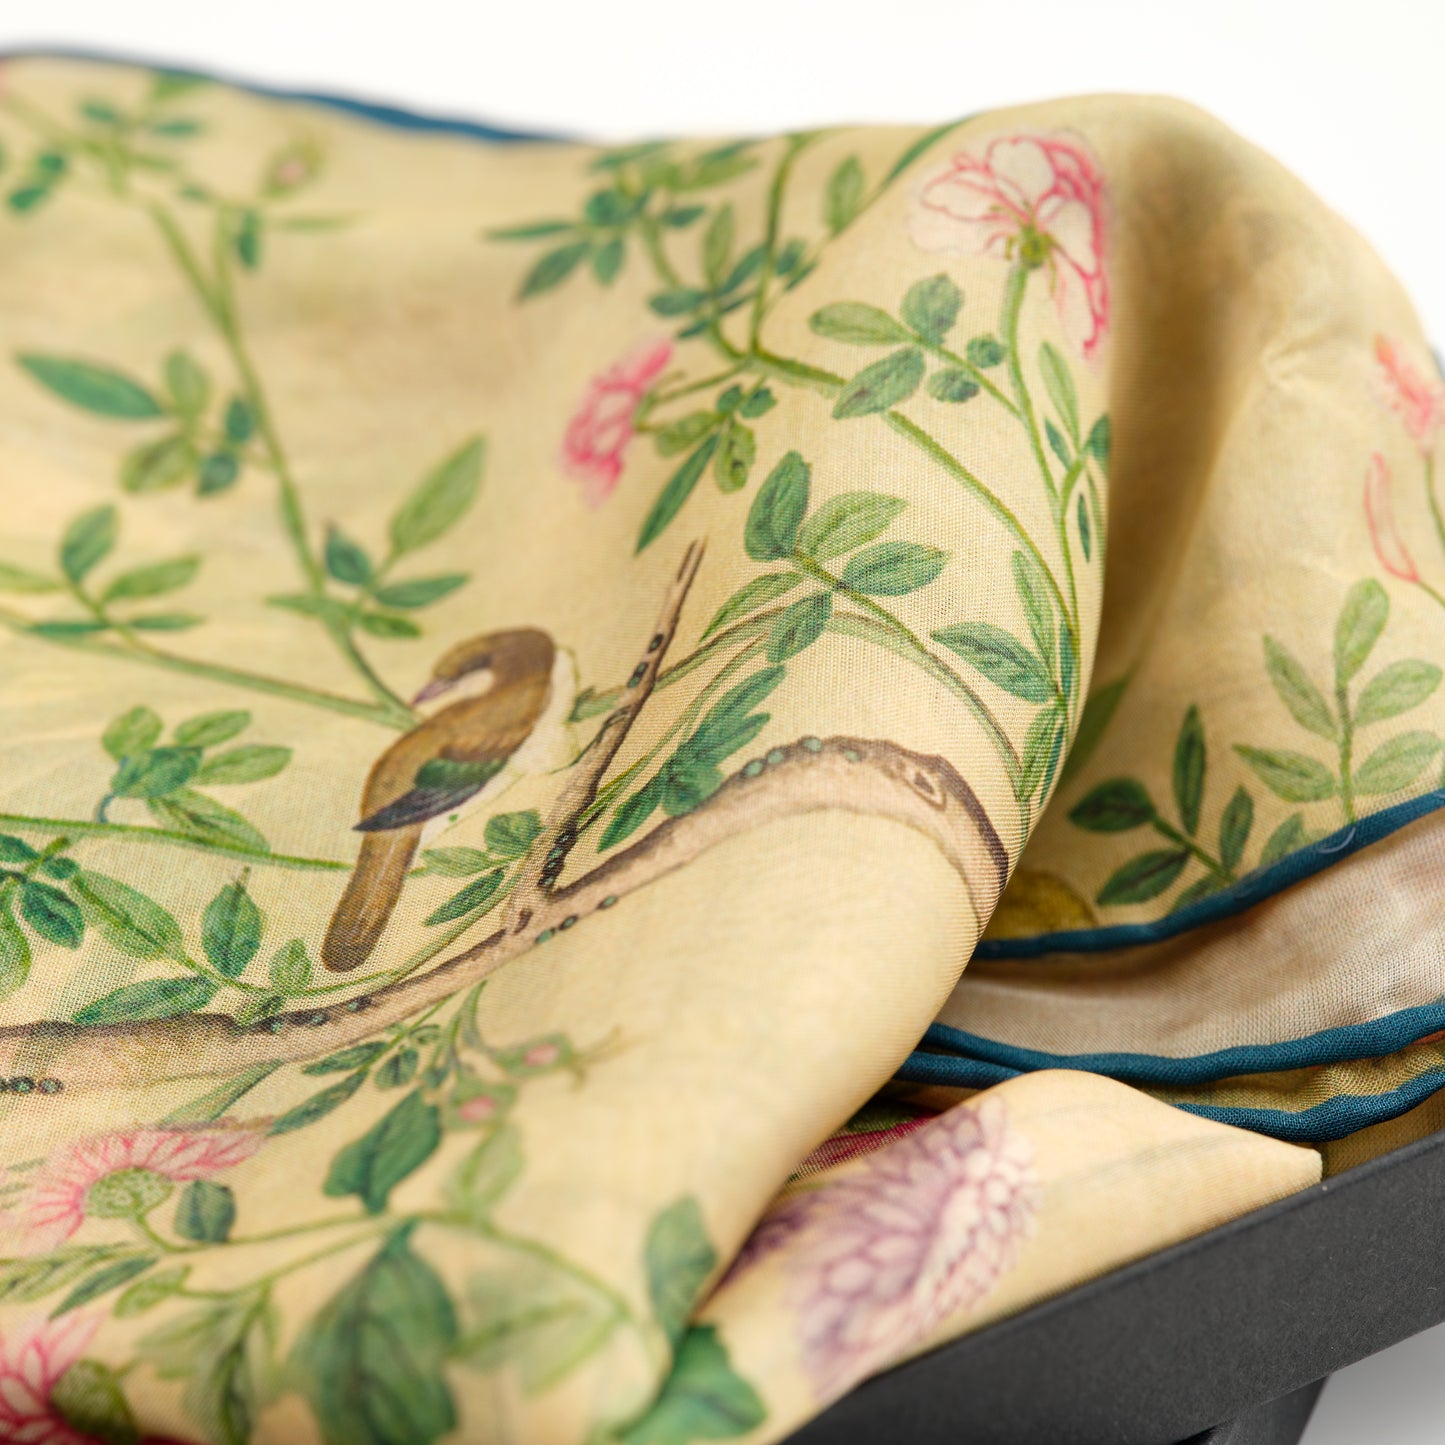 A close up look at a pastel yellow chiffon scarf decorated with birds, flowers and tree branches.